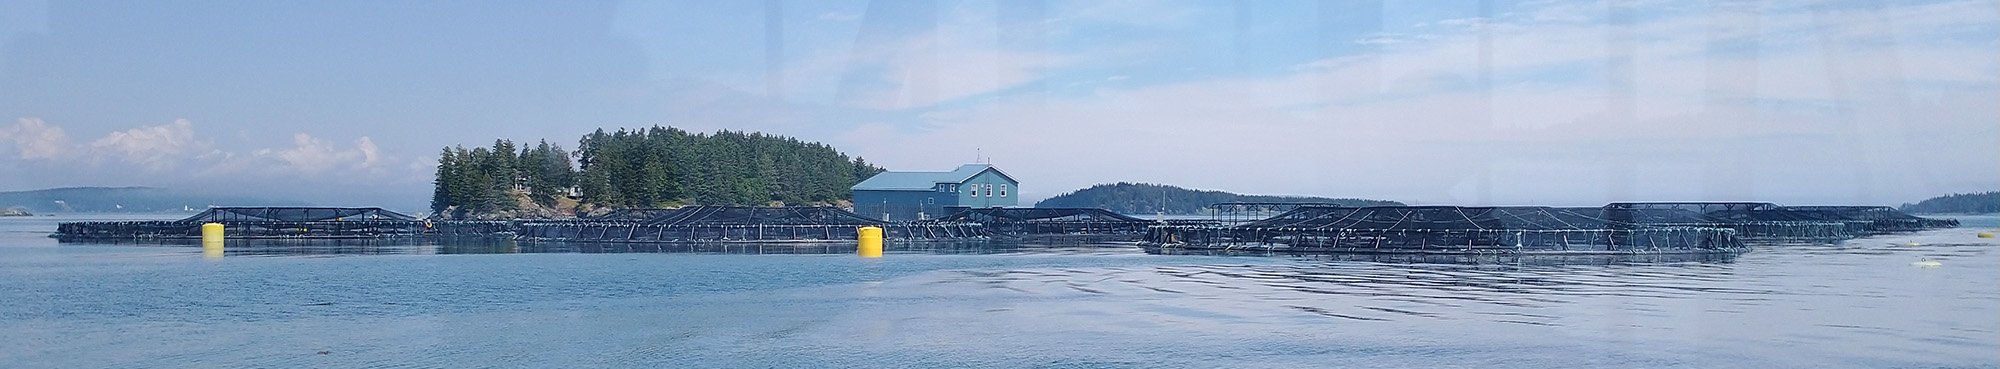 Salmon farms. Very efficient in terms of feed-to-meat, apparently. Likely not plentiful due to typical government red tape eco horseshit. 